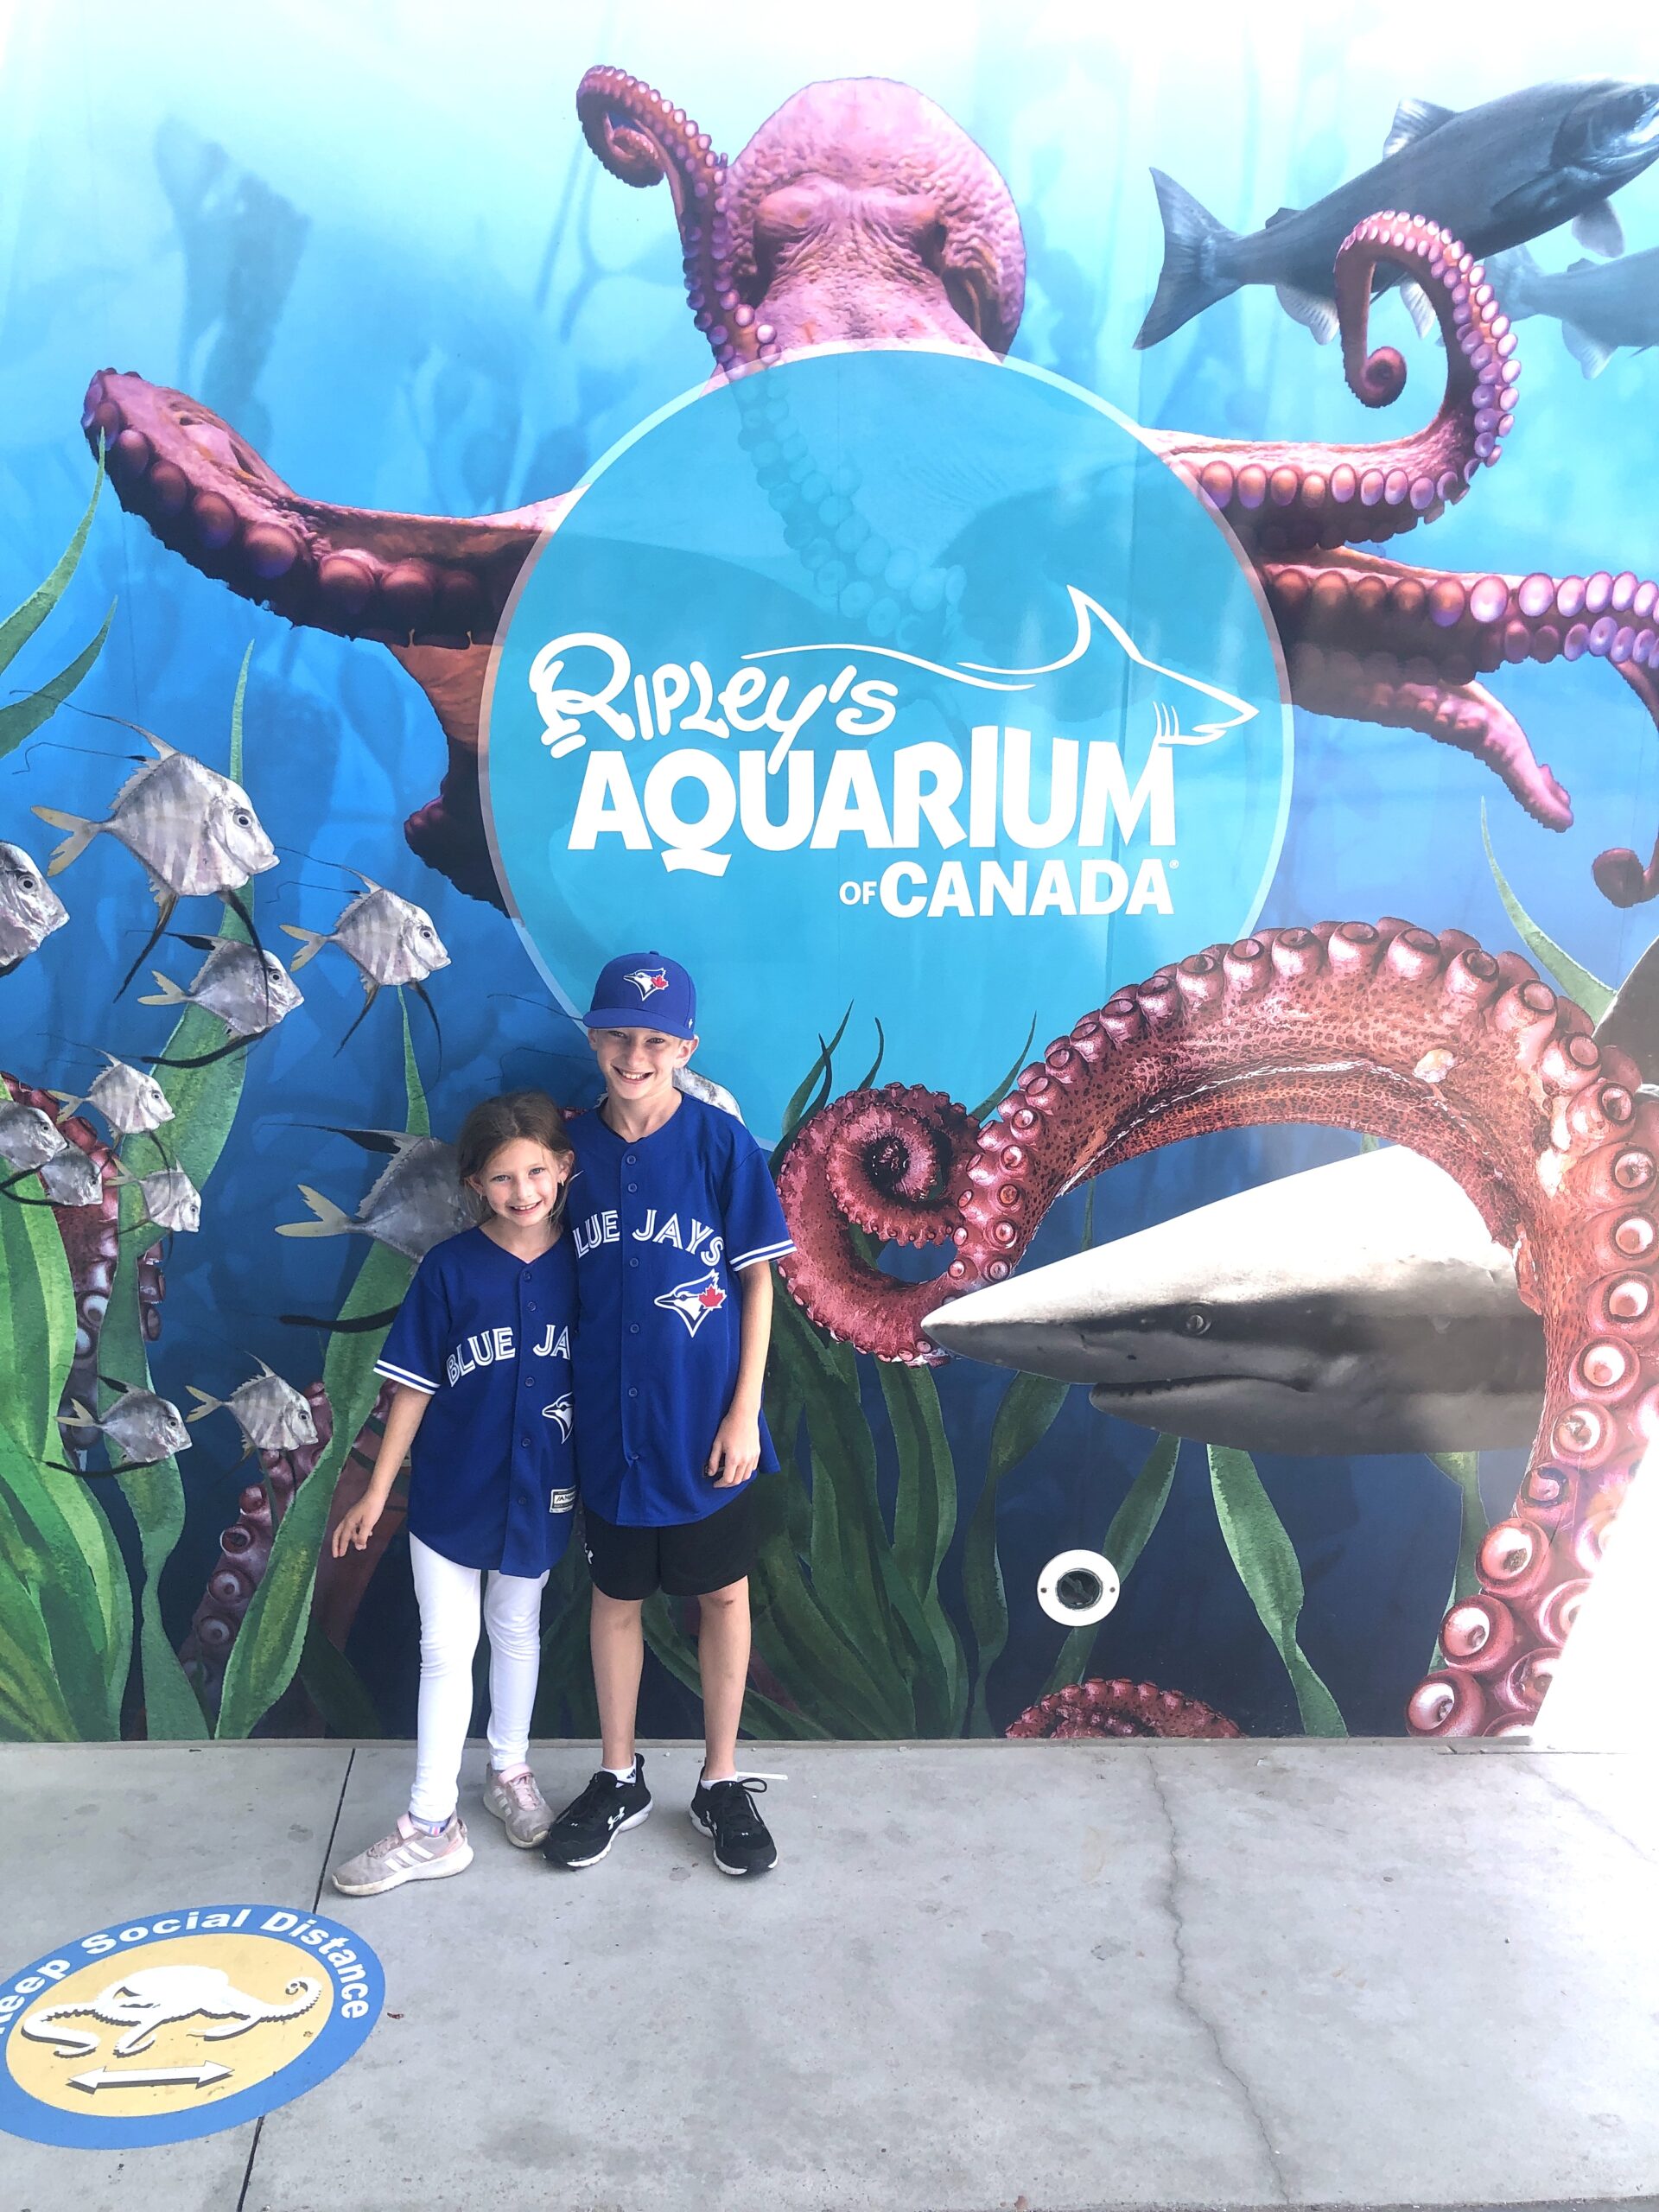 Ripleys Aquarium Review on Livin' Life with Style